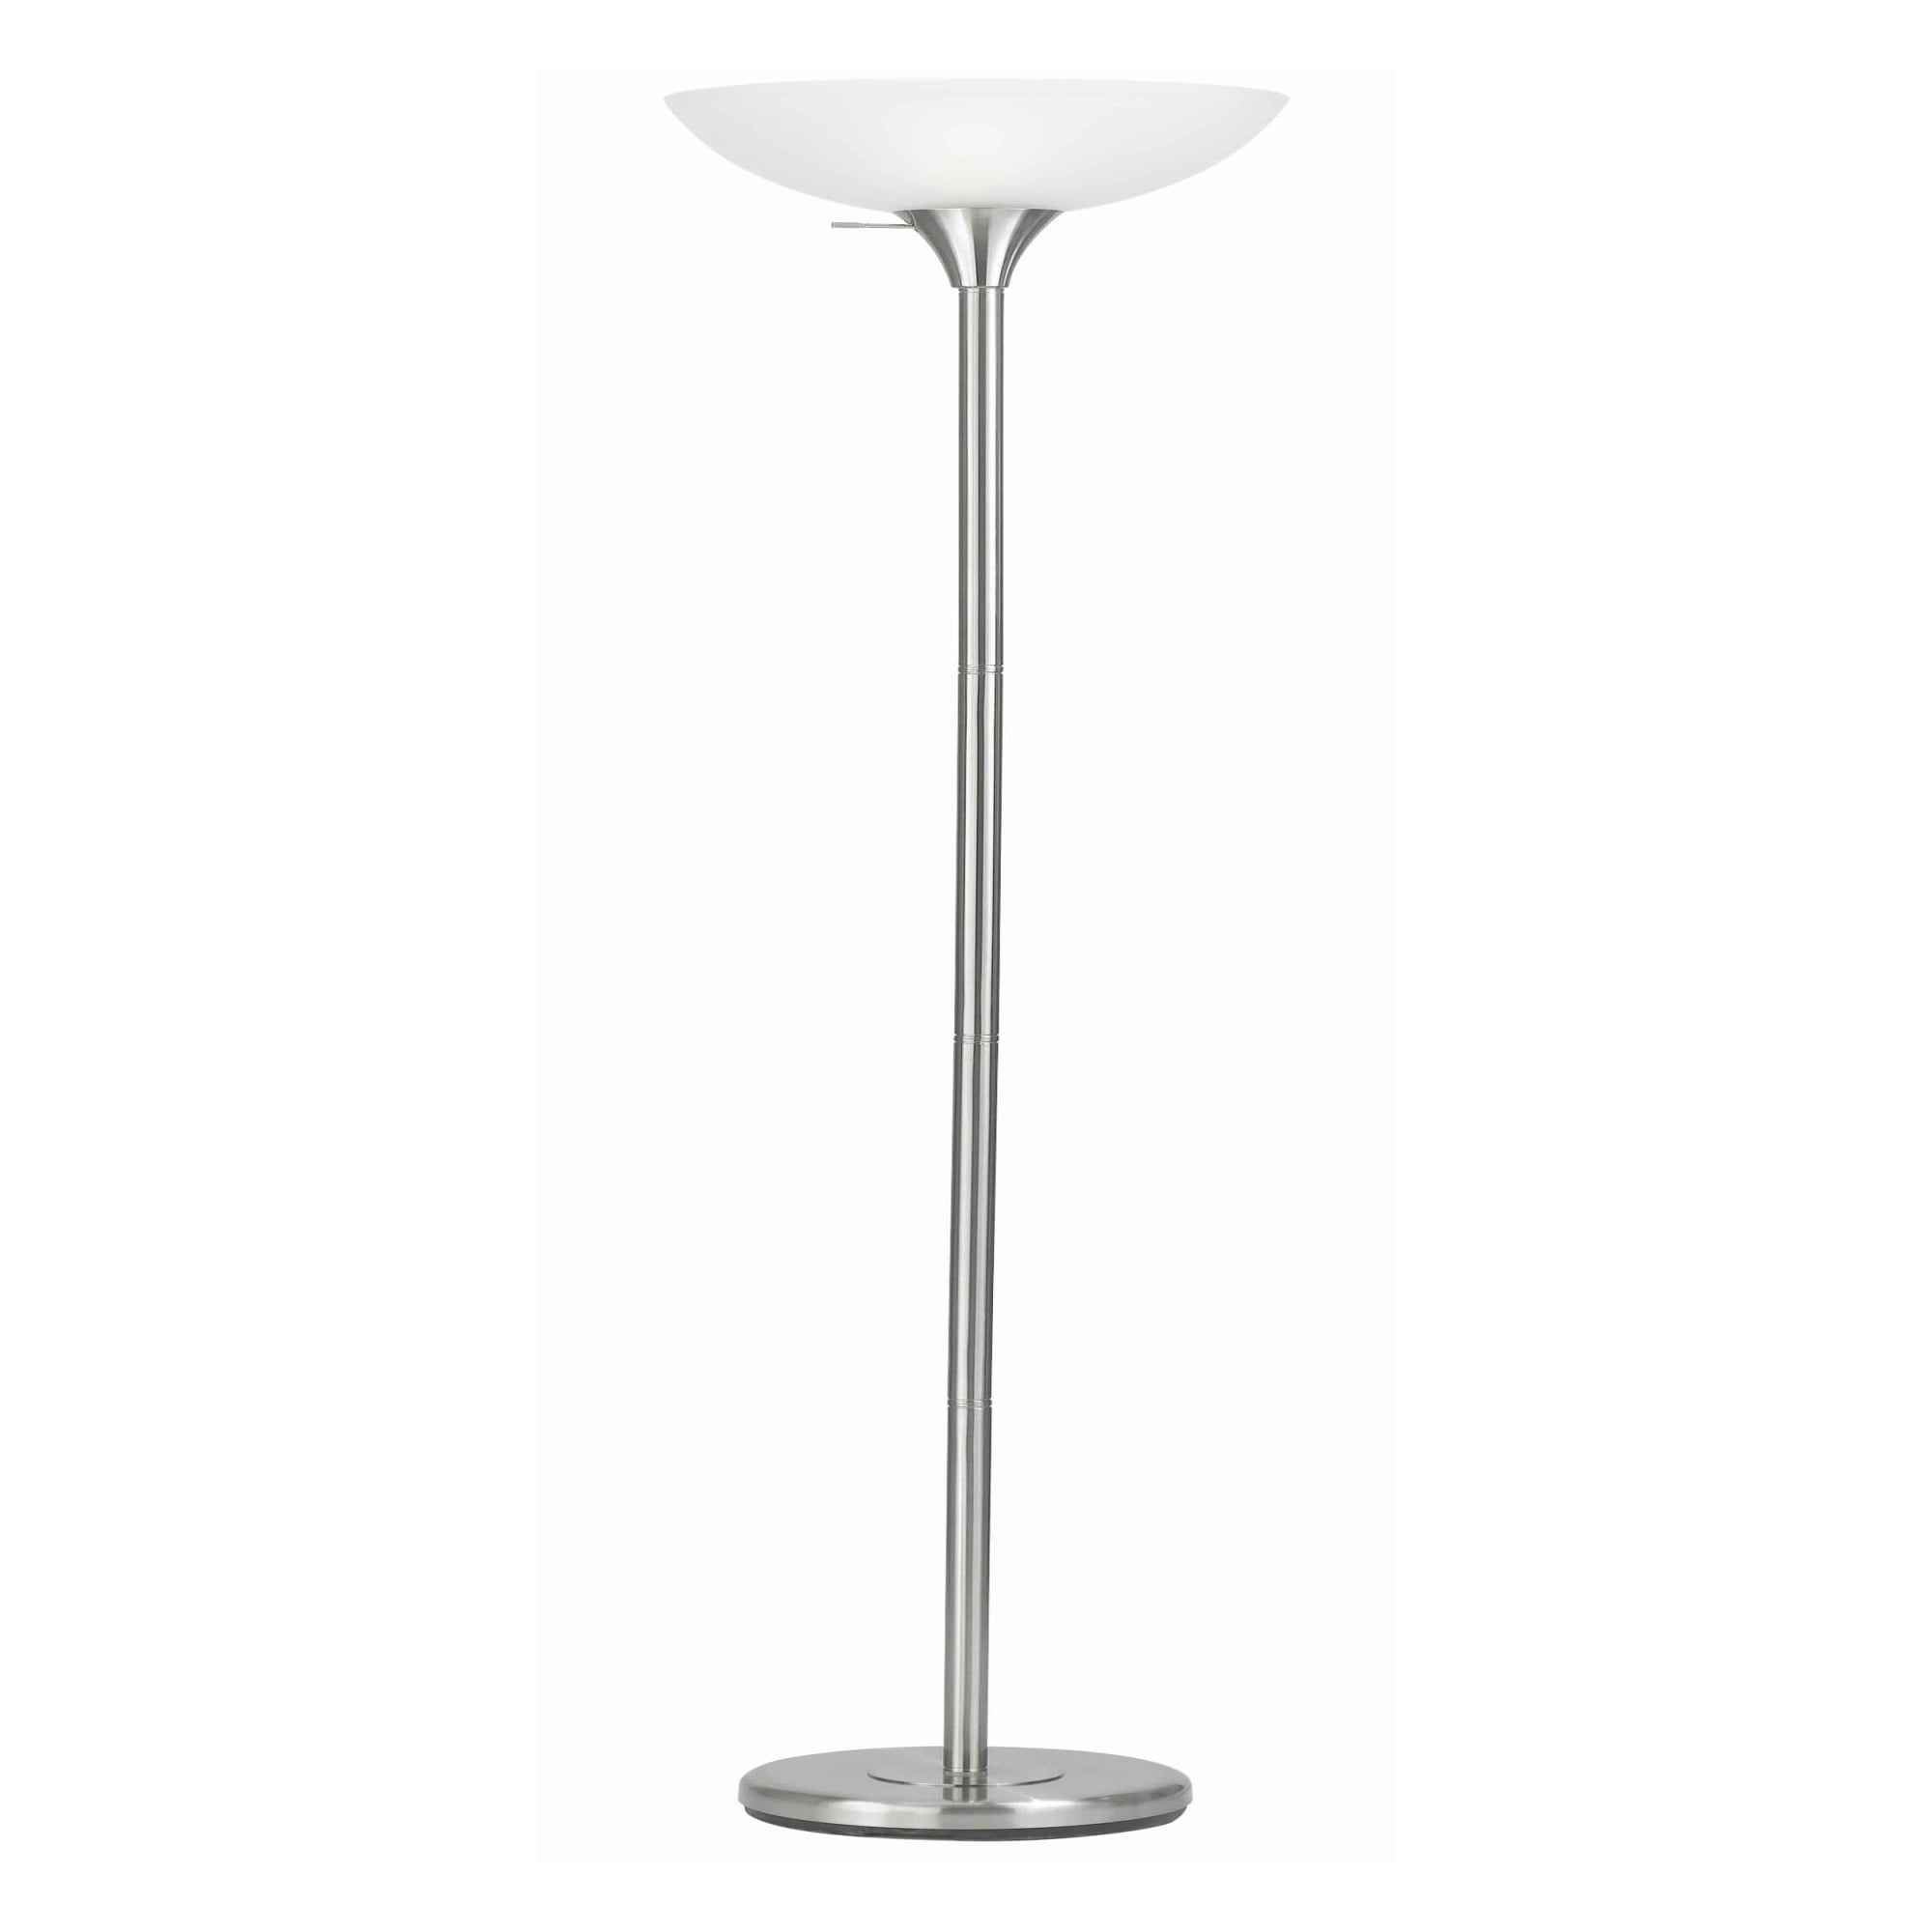 3 Way Torchiere Floor Lamp With Frosted, Black Torchiere Floor Lamp With Glass Shade